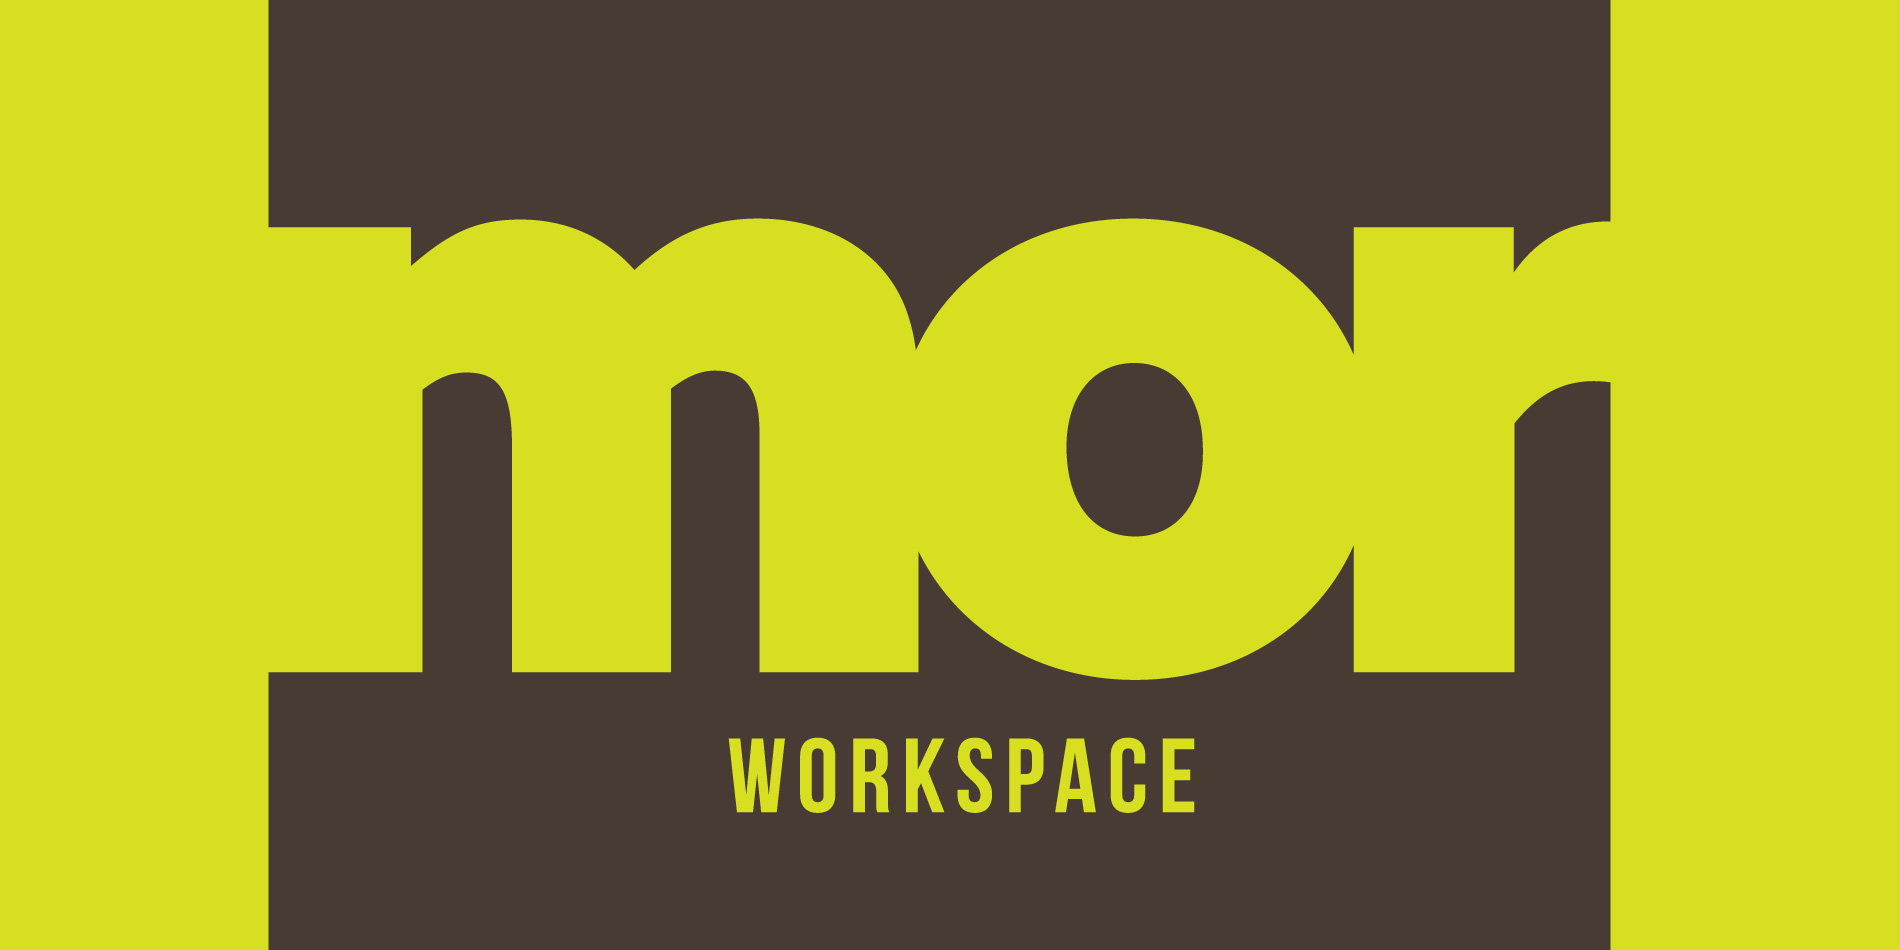 mor workspace, cornwall, newquay, office, office space, shared, shared workspace, hot desk, conference, events, meeting, meeting room, creative, mor, cornwall creative, design agency, photography, now open, england, uk, business, opportunities, staff, creative place to work